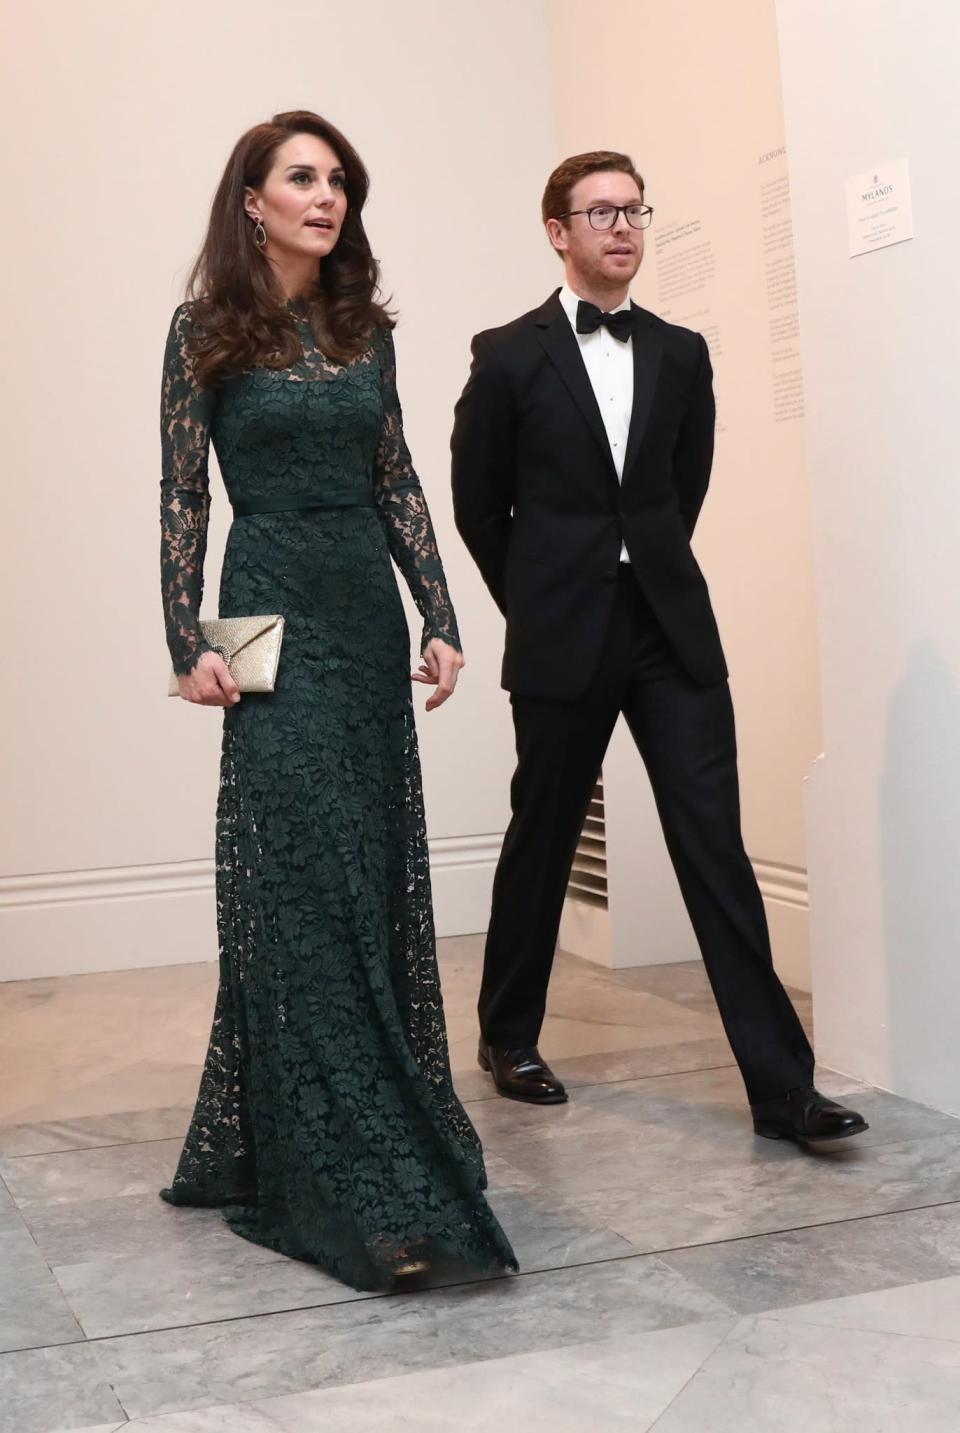 <p>Kate was a complete vision in an emerald lacy gown by Temperley London. Attending her second National Portrait Gala, the Duchess stole the show in the floor-length look accompanied by golden accessories: a glitter clutch by Wilbur and Gussie and strappy Jimmy Choo sandals.<br><i>[Photo: PA]</i> </p>